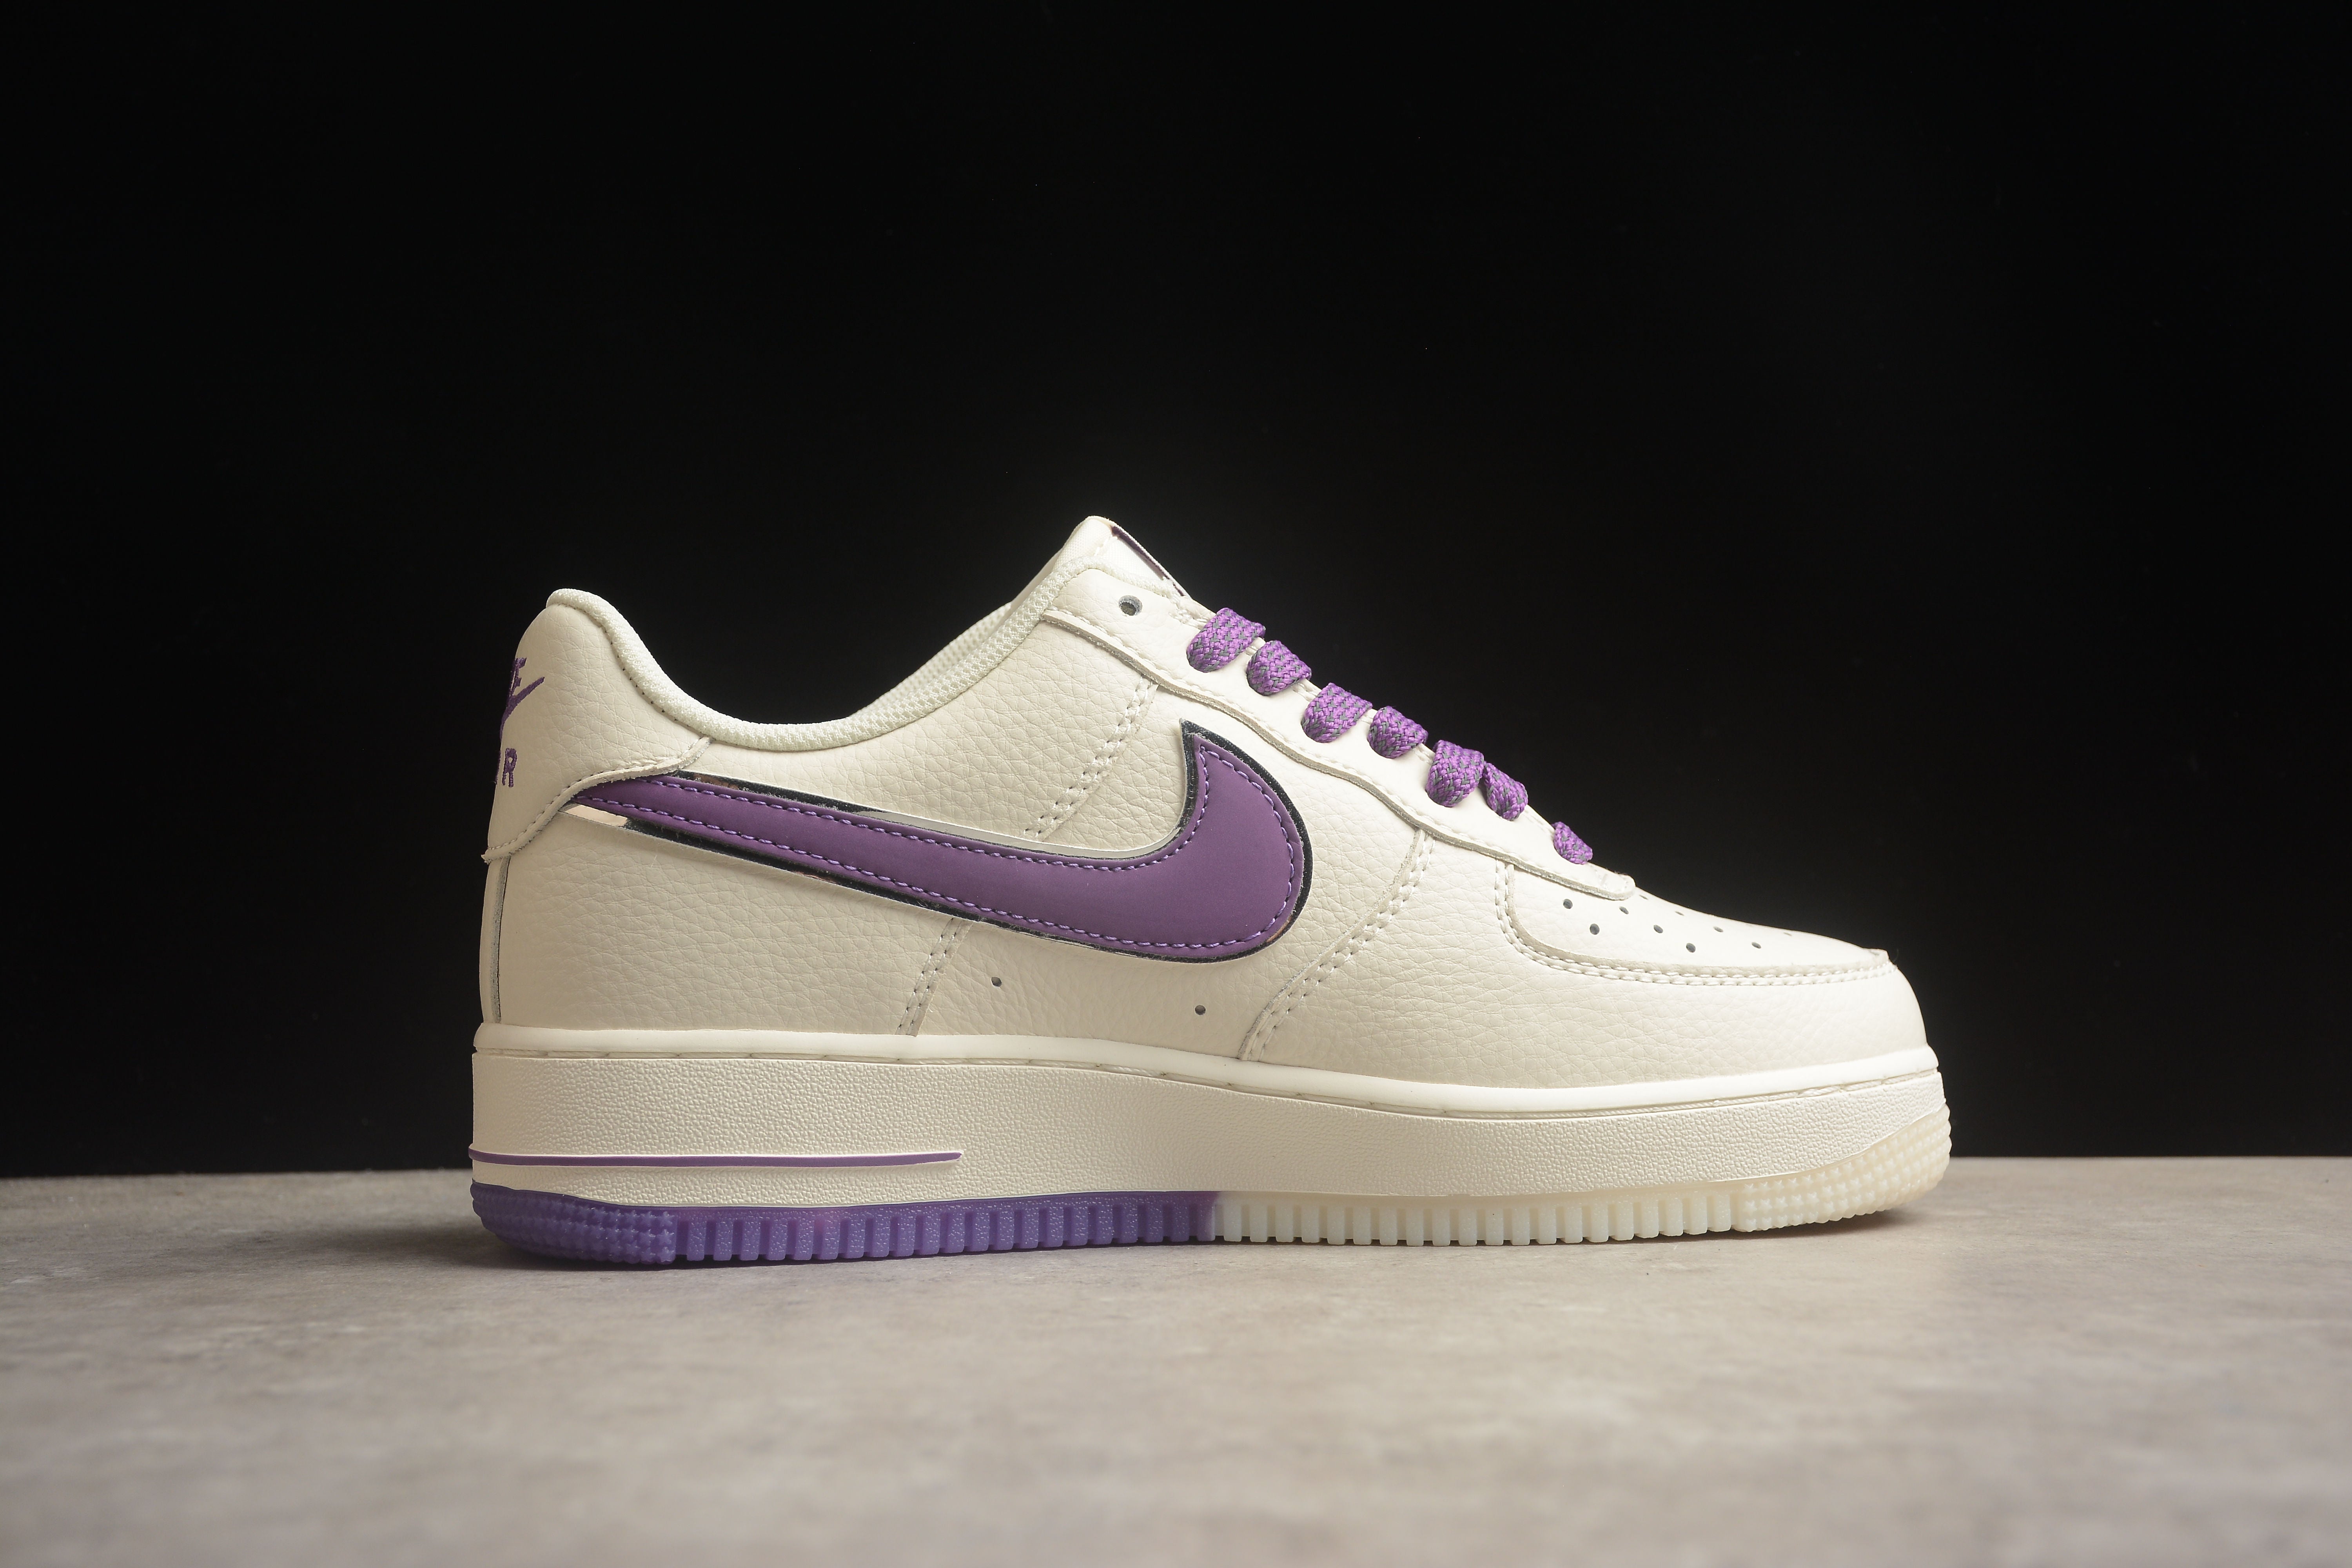 Nike airforce A1 lilac shoes